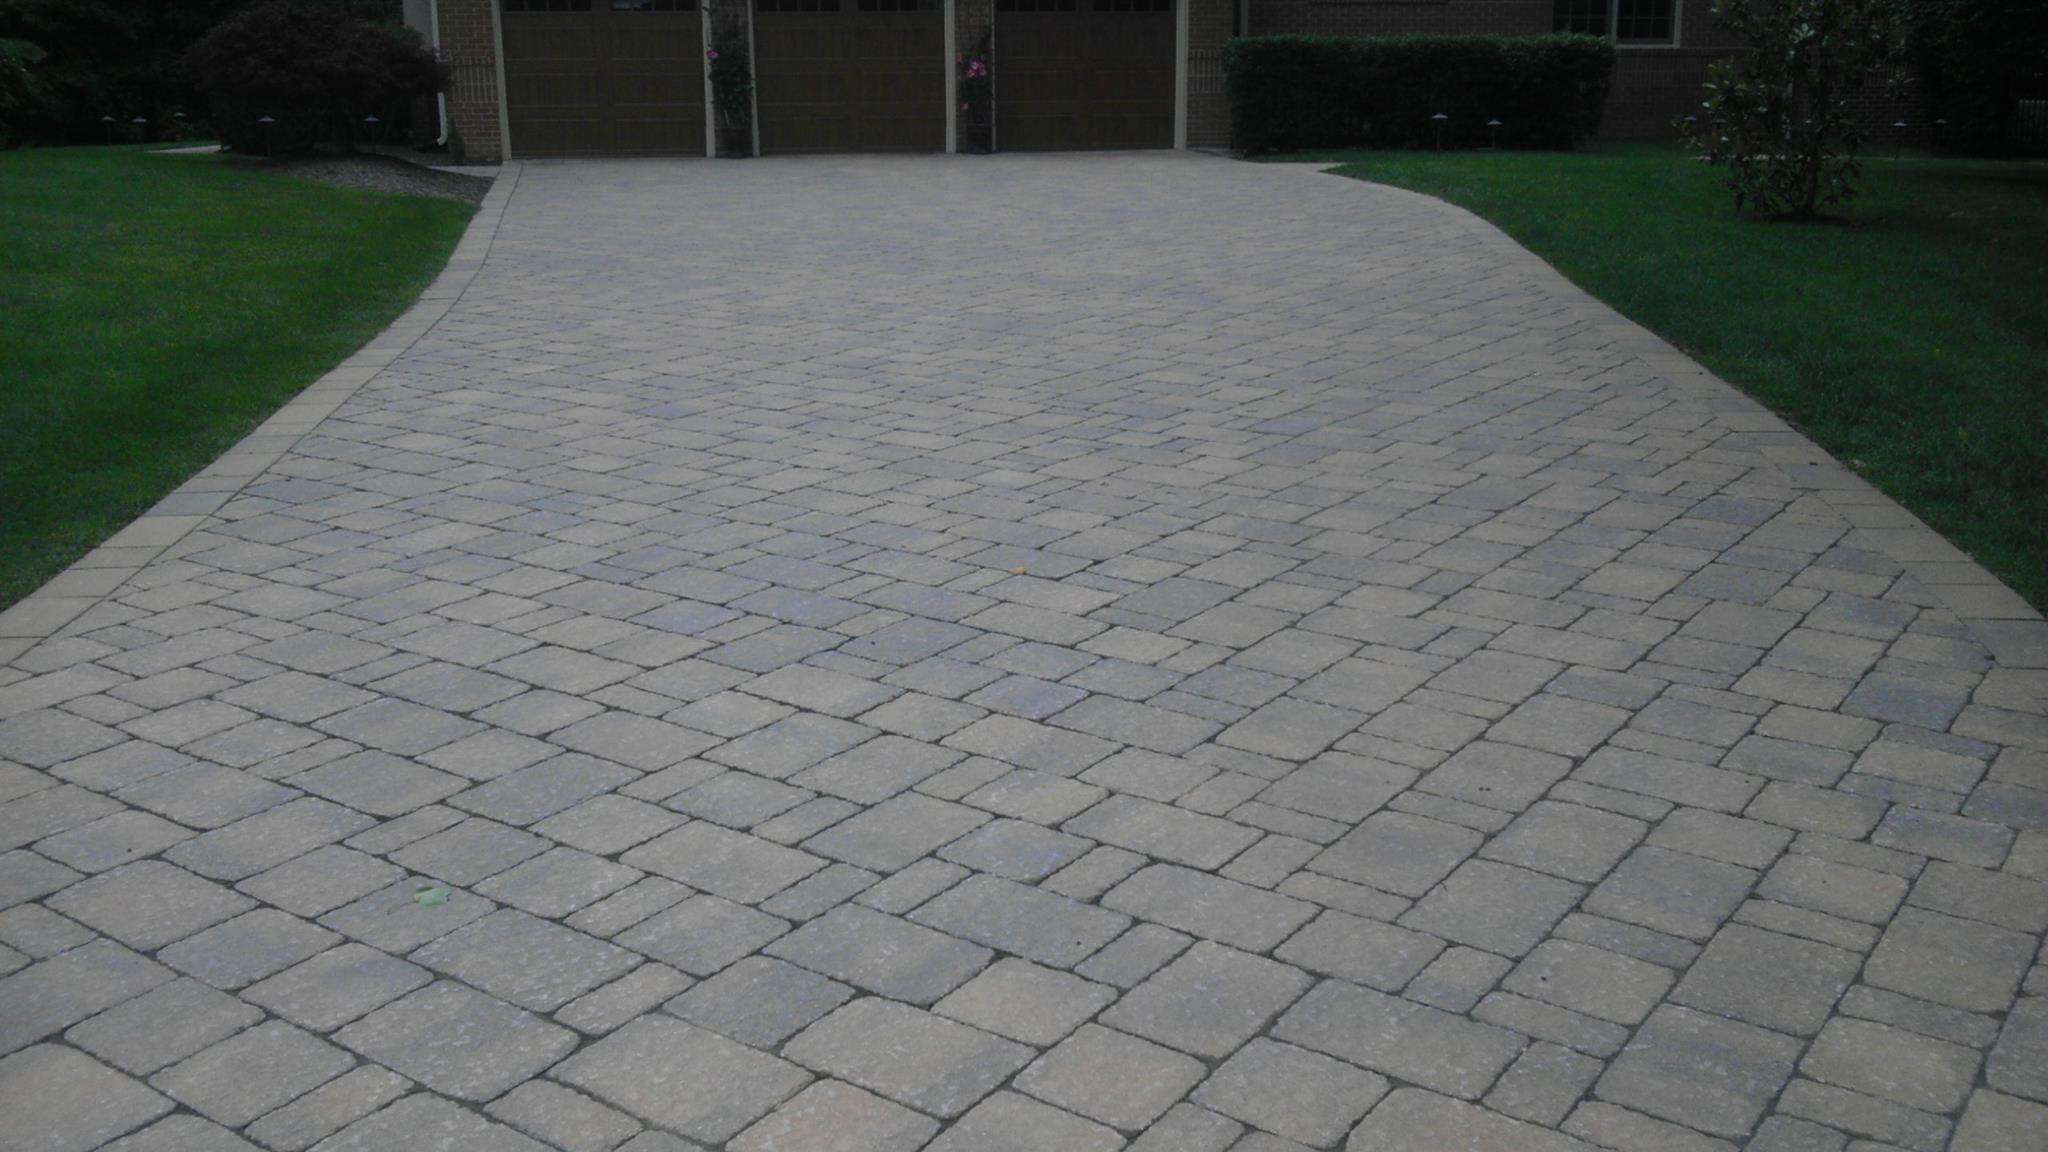 Pavers with polymeric sand in between